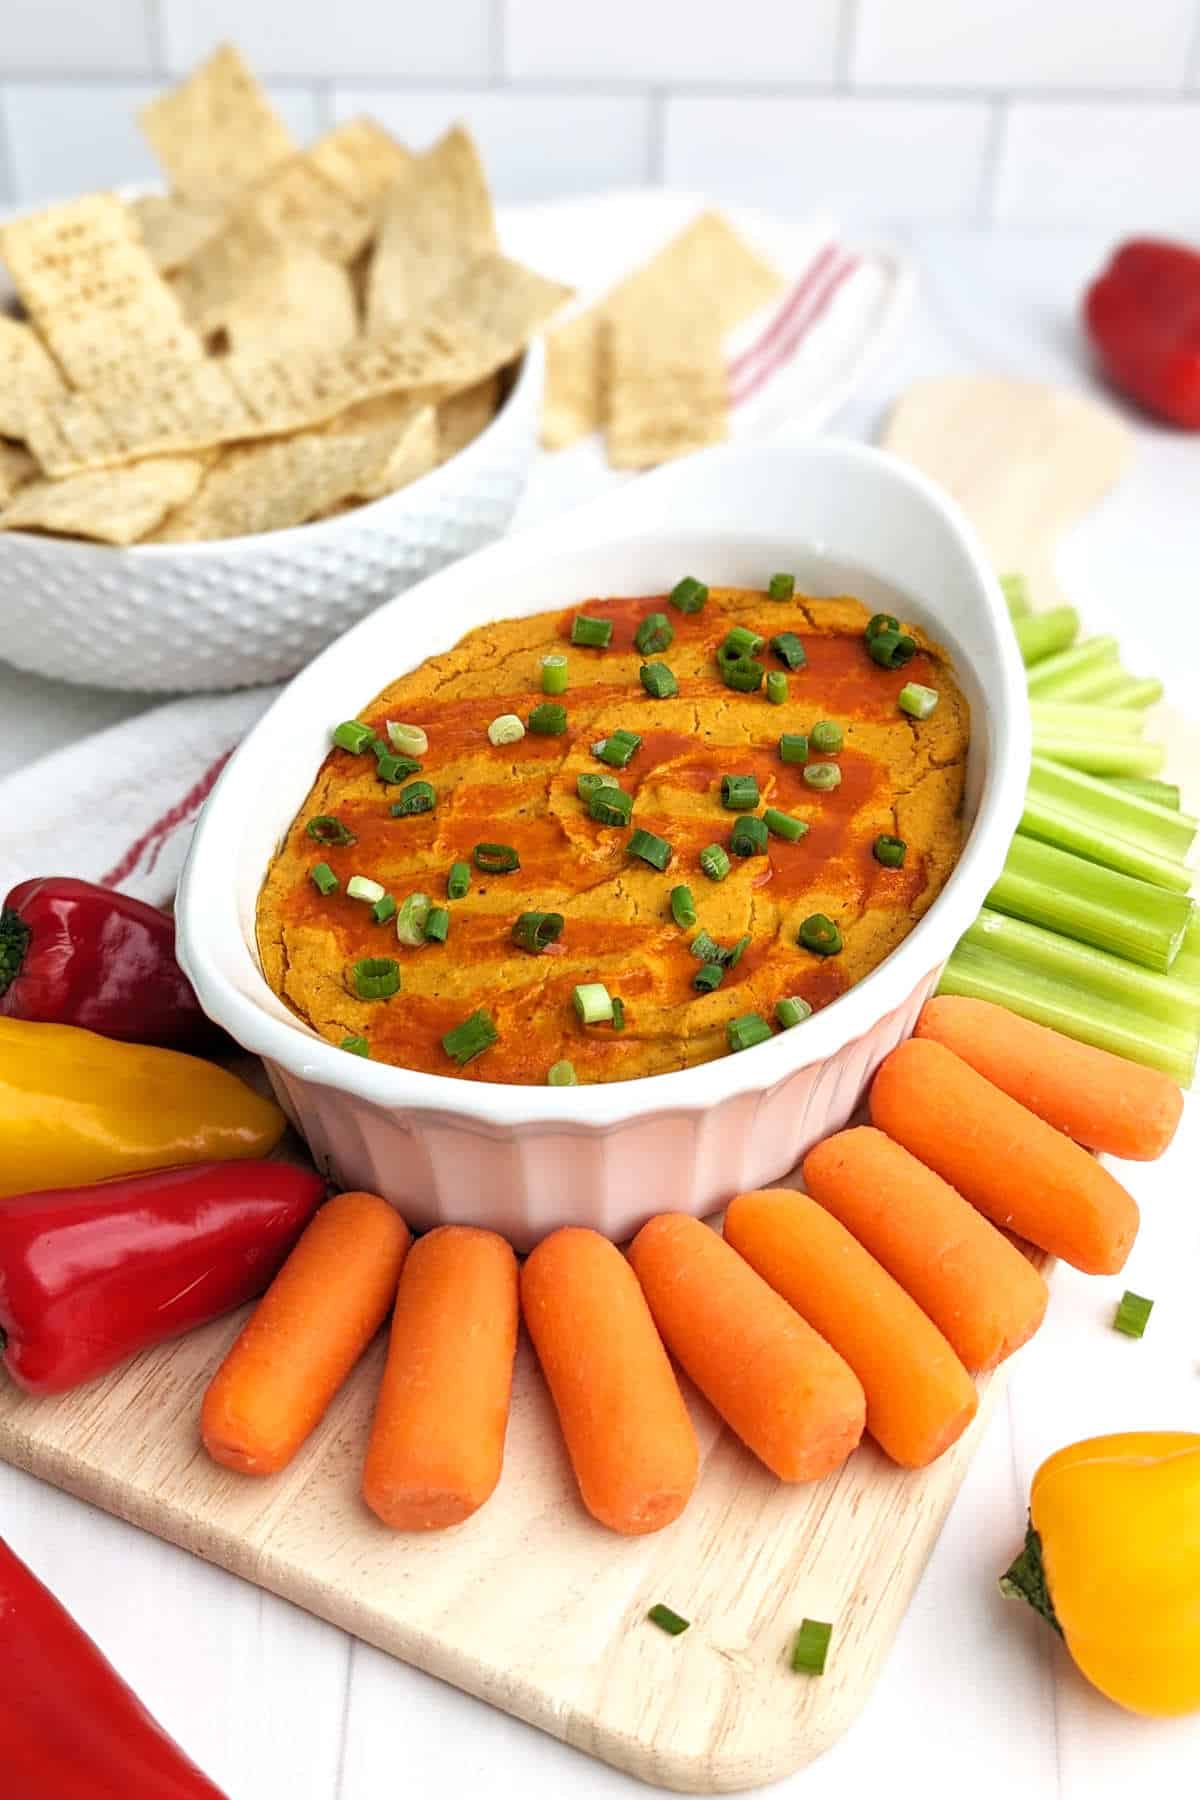 Buffalo chickpea dip in a casserole dish, surrounded by tortilla chips, carrot sticks, celery sticks, and fresh peppers.